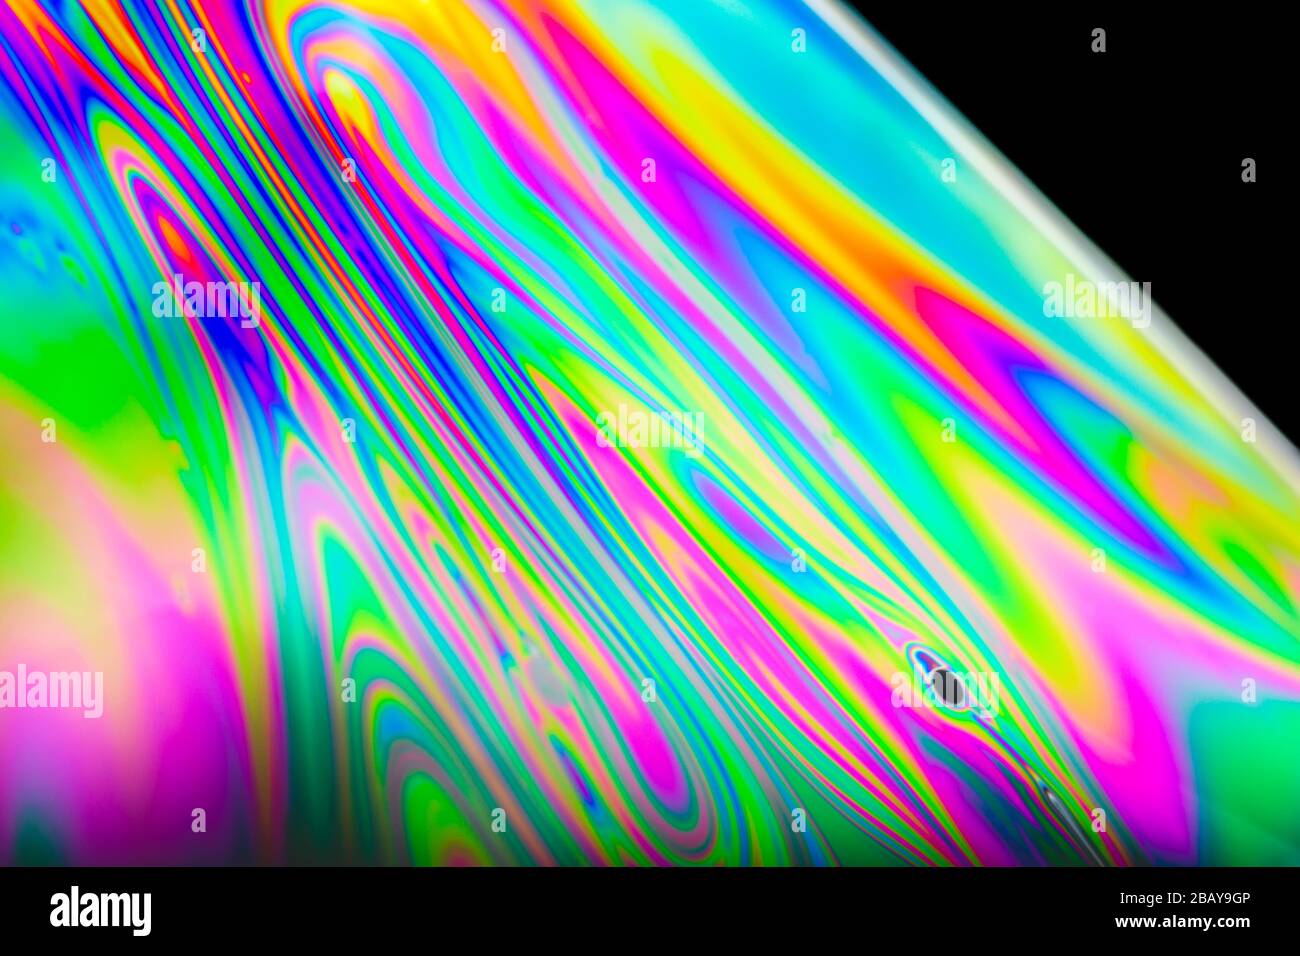 Macro of a soap bubble with abstract rainbow colors Stock Photo